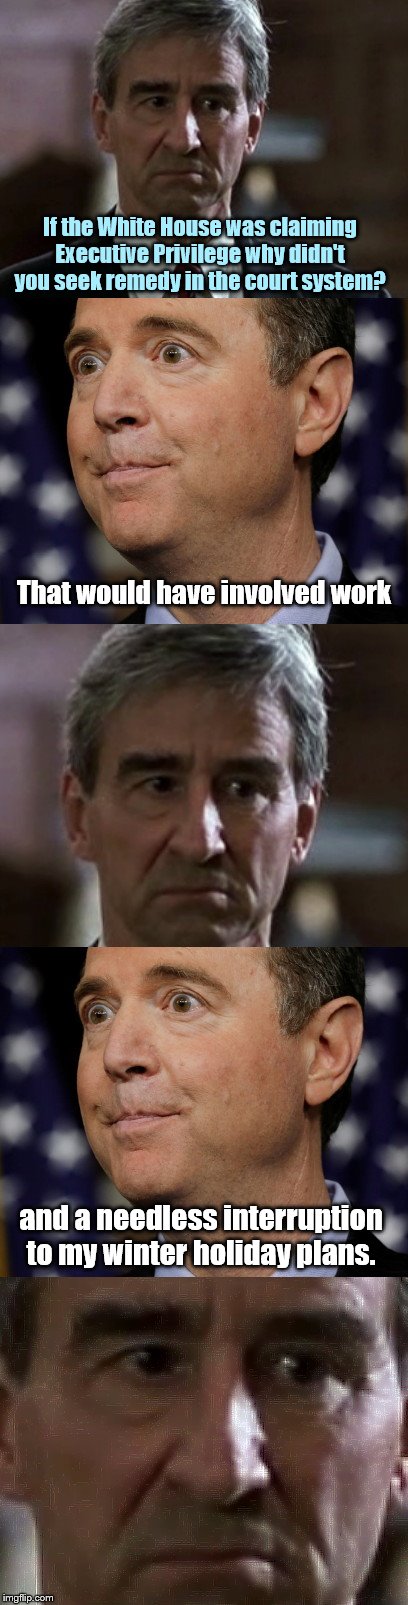 You know he's not your Adam Schiff when.. | If the White House was claiming Executive Privilege why didn't you seek remedy in the court system? That would have involved work; and a needless interruption to my winter holiday plans. | image tagged in jack mccoy,law and orders adam schiff,shifty schiff,lazy democrats,political humor | made w/ Imgflip meme maker